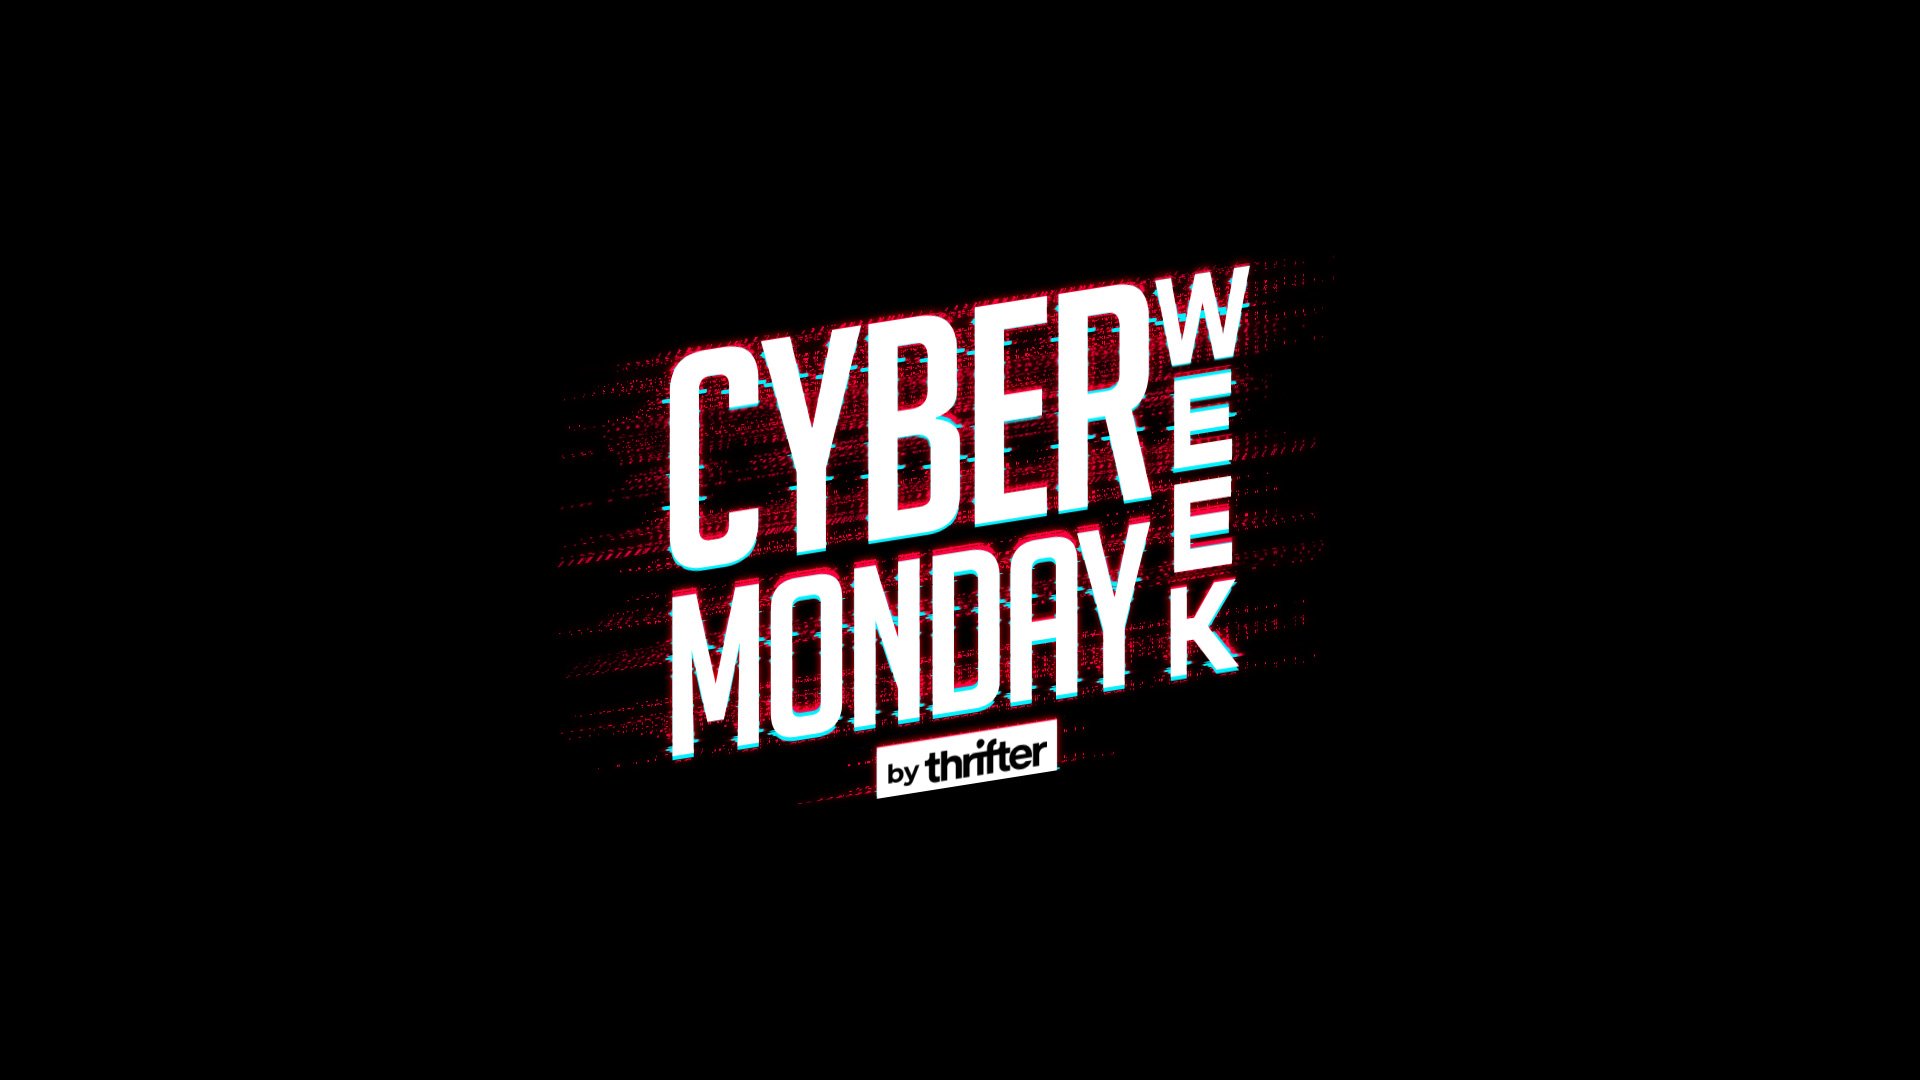 Best Uk Cyber Monday Deals In 2019 Android Central